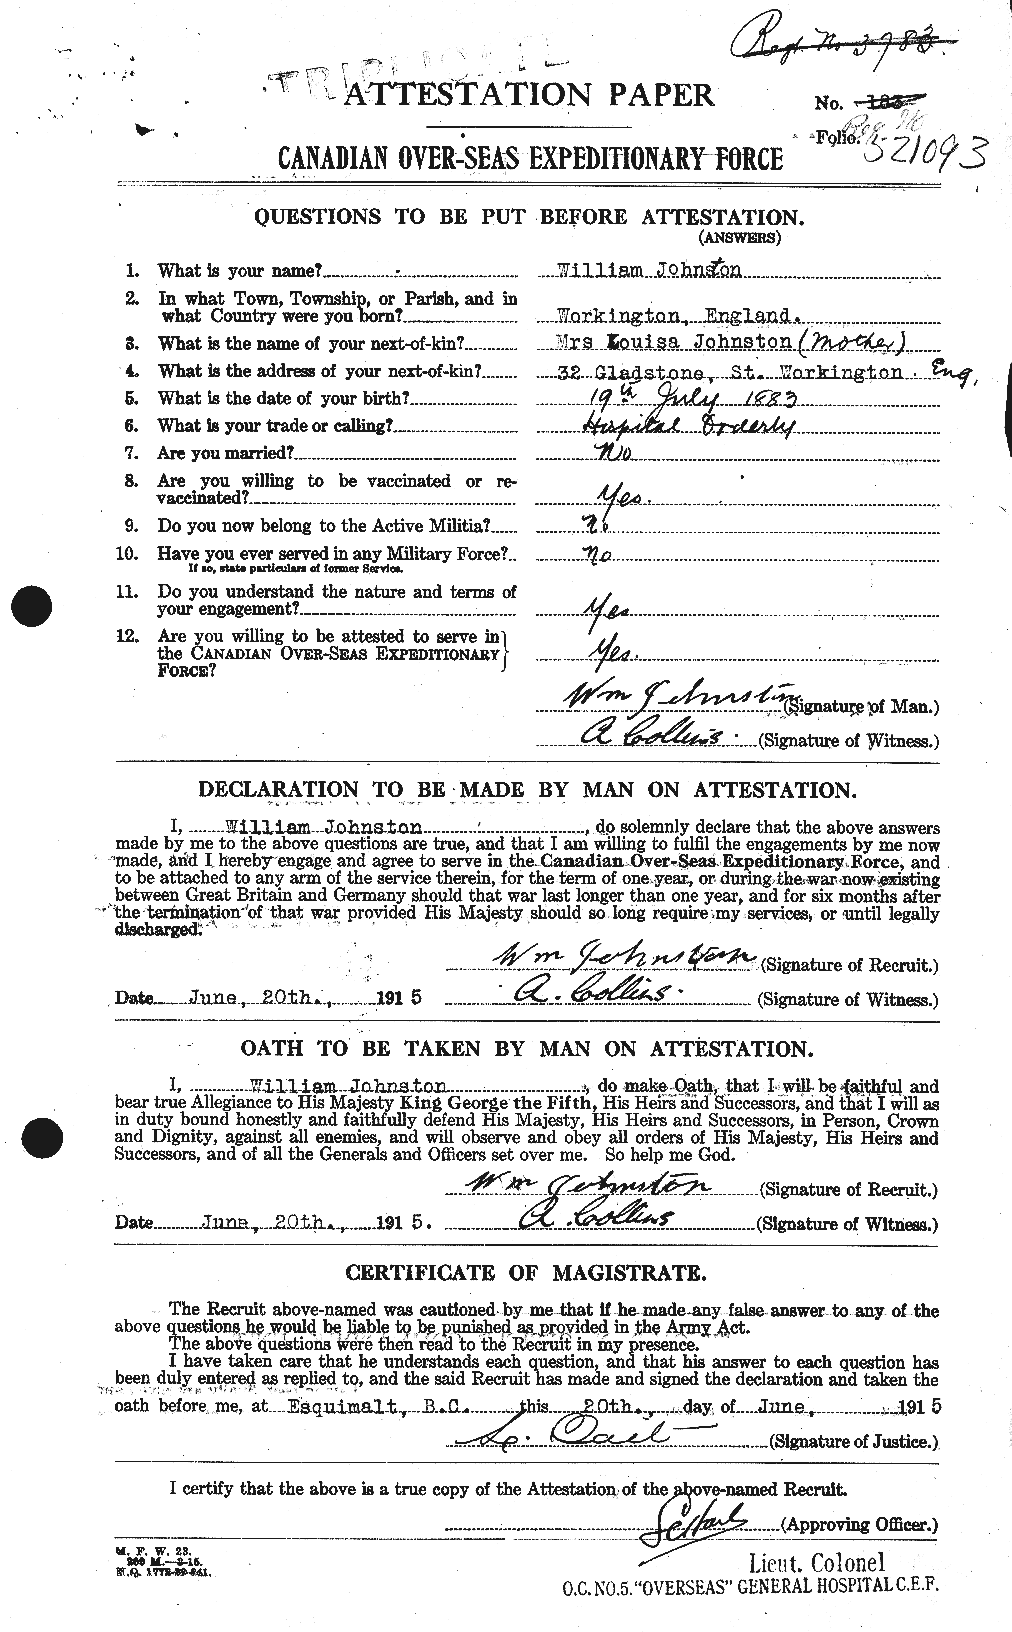 Personnel Records of the First World War - CEF 427272a